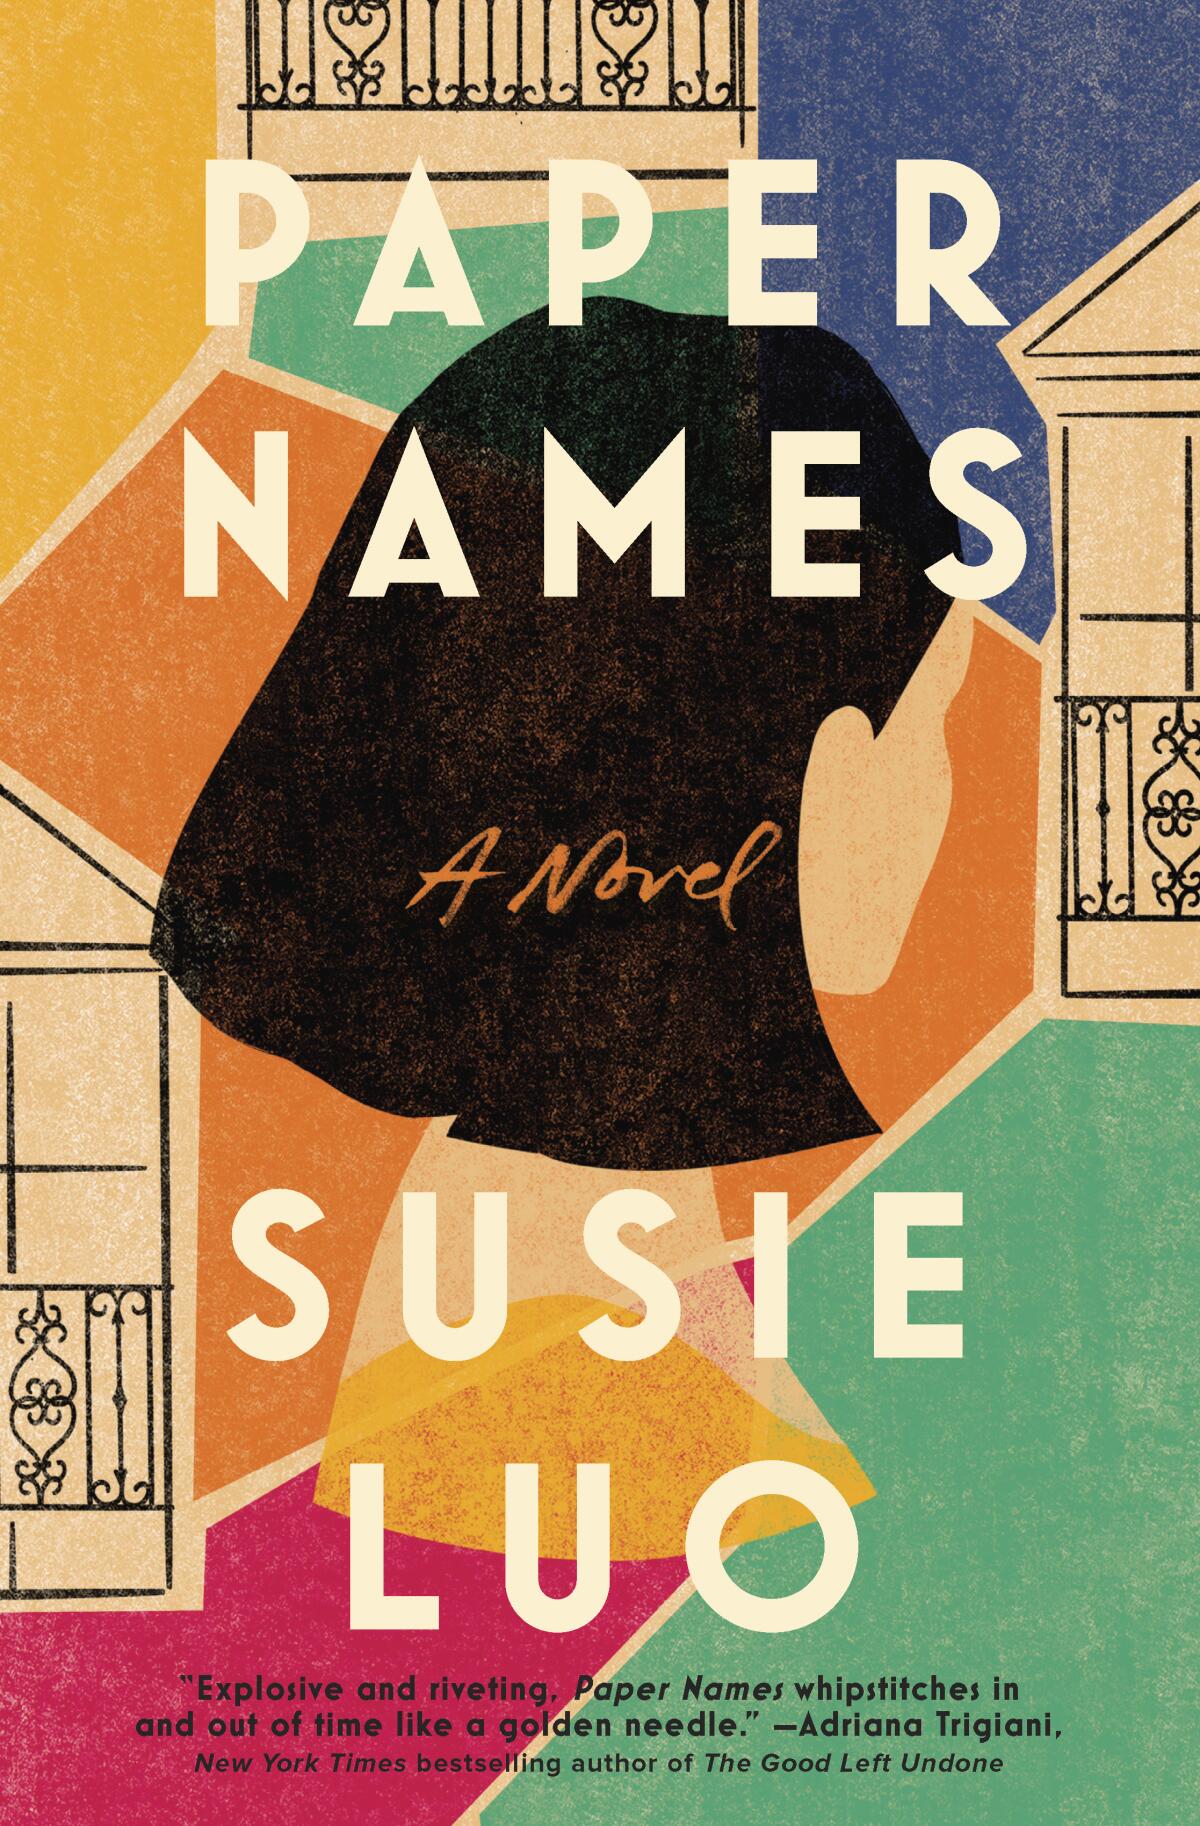 "Paper Names" is Susie Luo's debut novel about a Chinese-American family in New York.